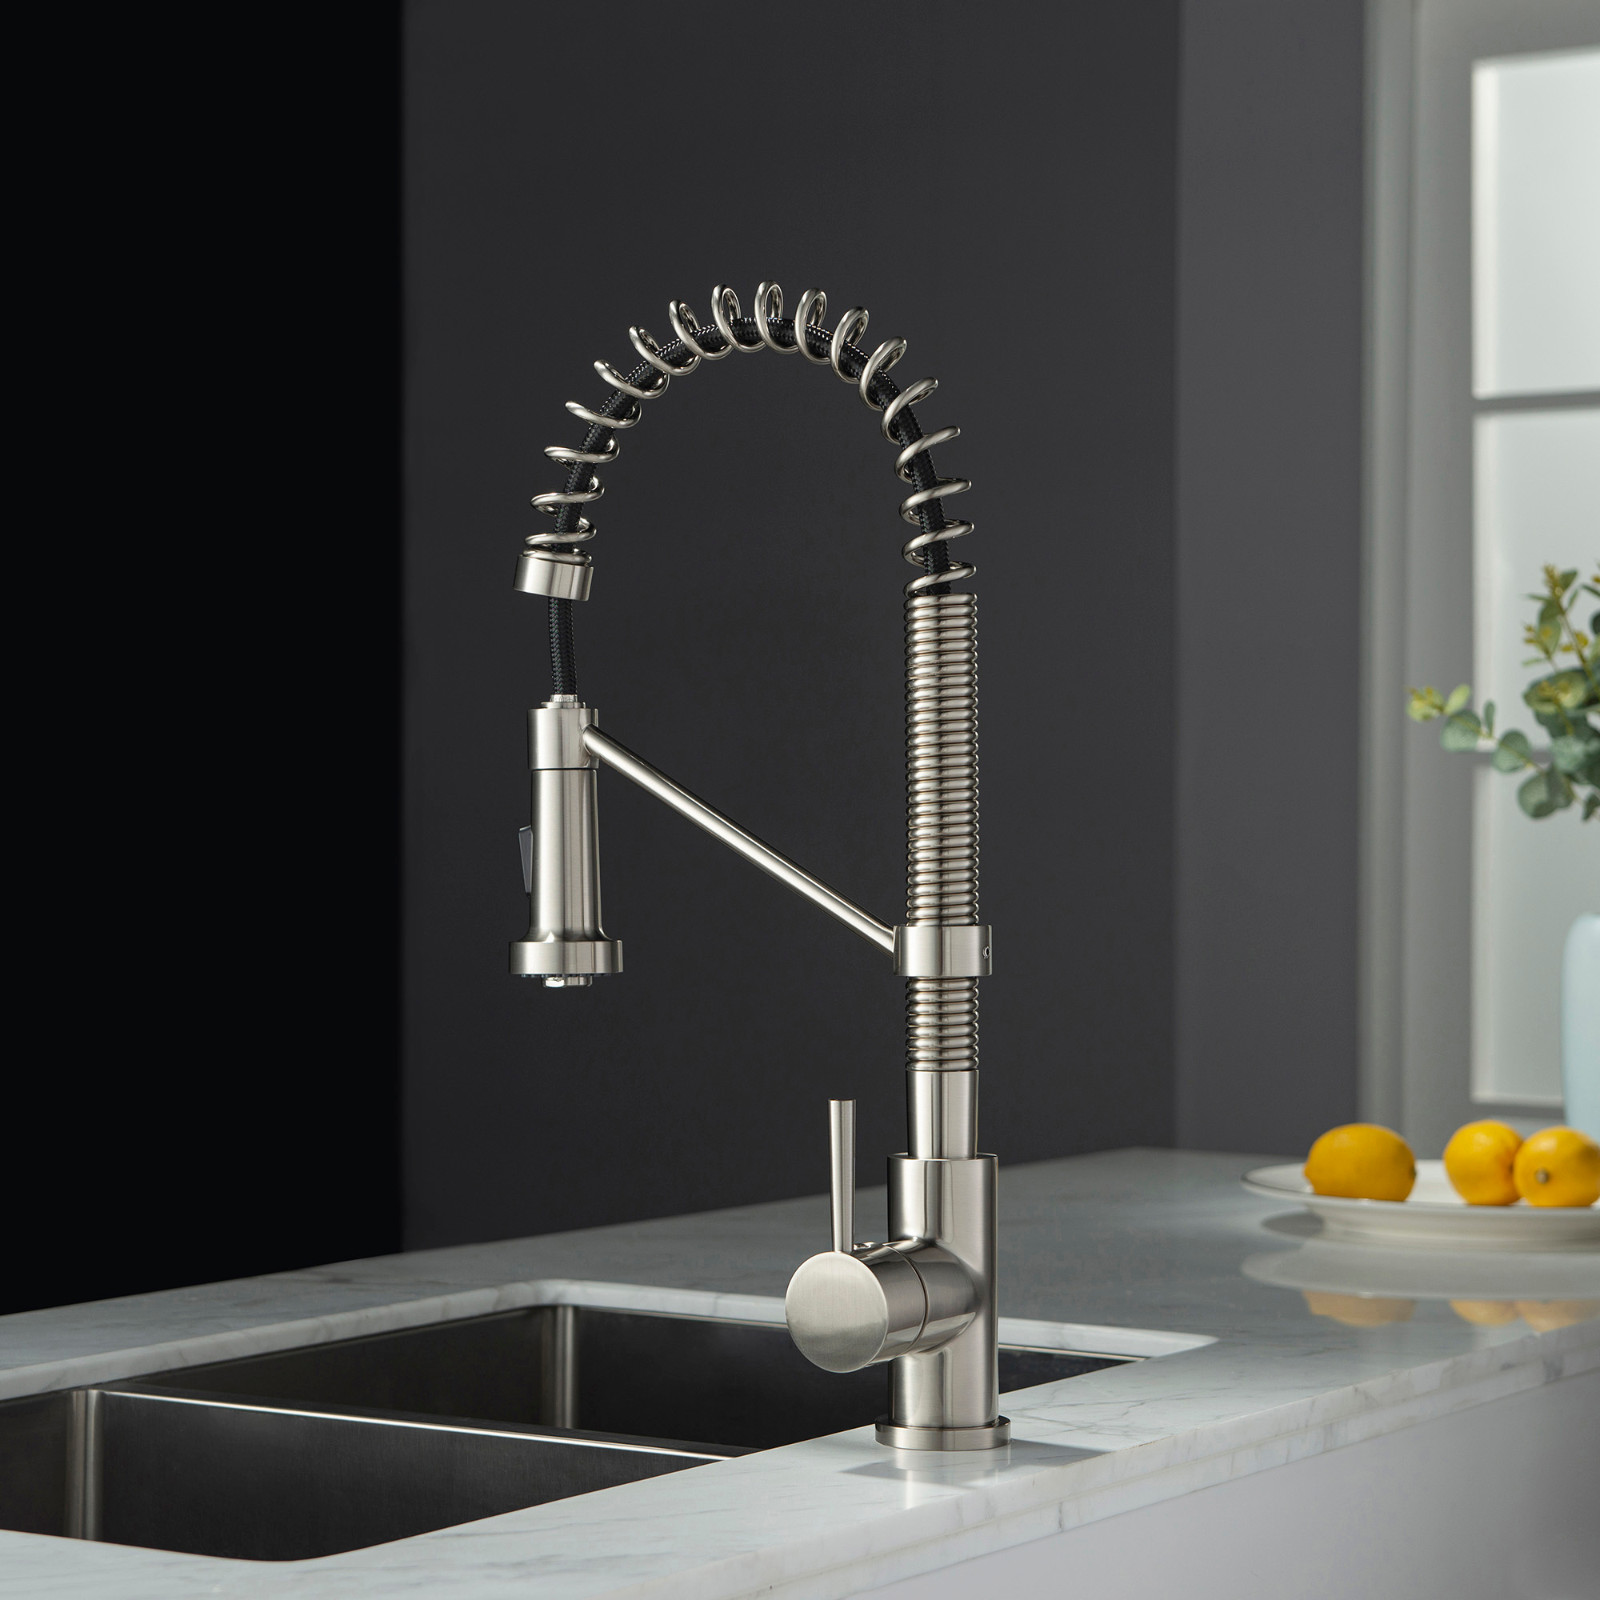  WOODBRIDGE WK010203BN Stainless Steel Single Handle Spring Coil Pre-Rinse Kitchen Faucet with Pull Down Sprayer, Brushed Nickel Finish_9475